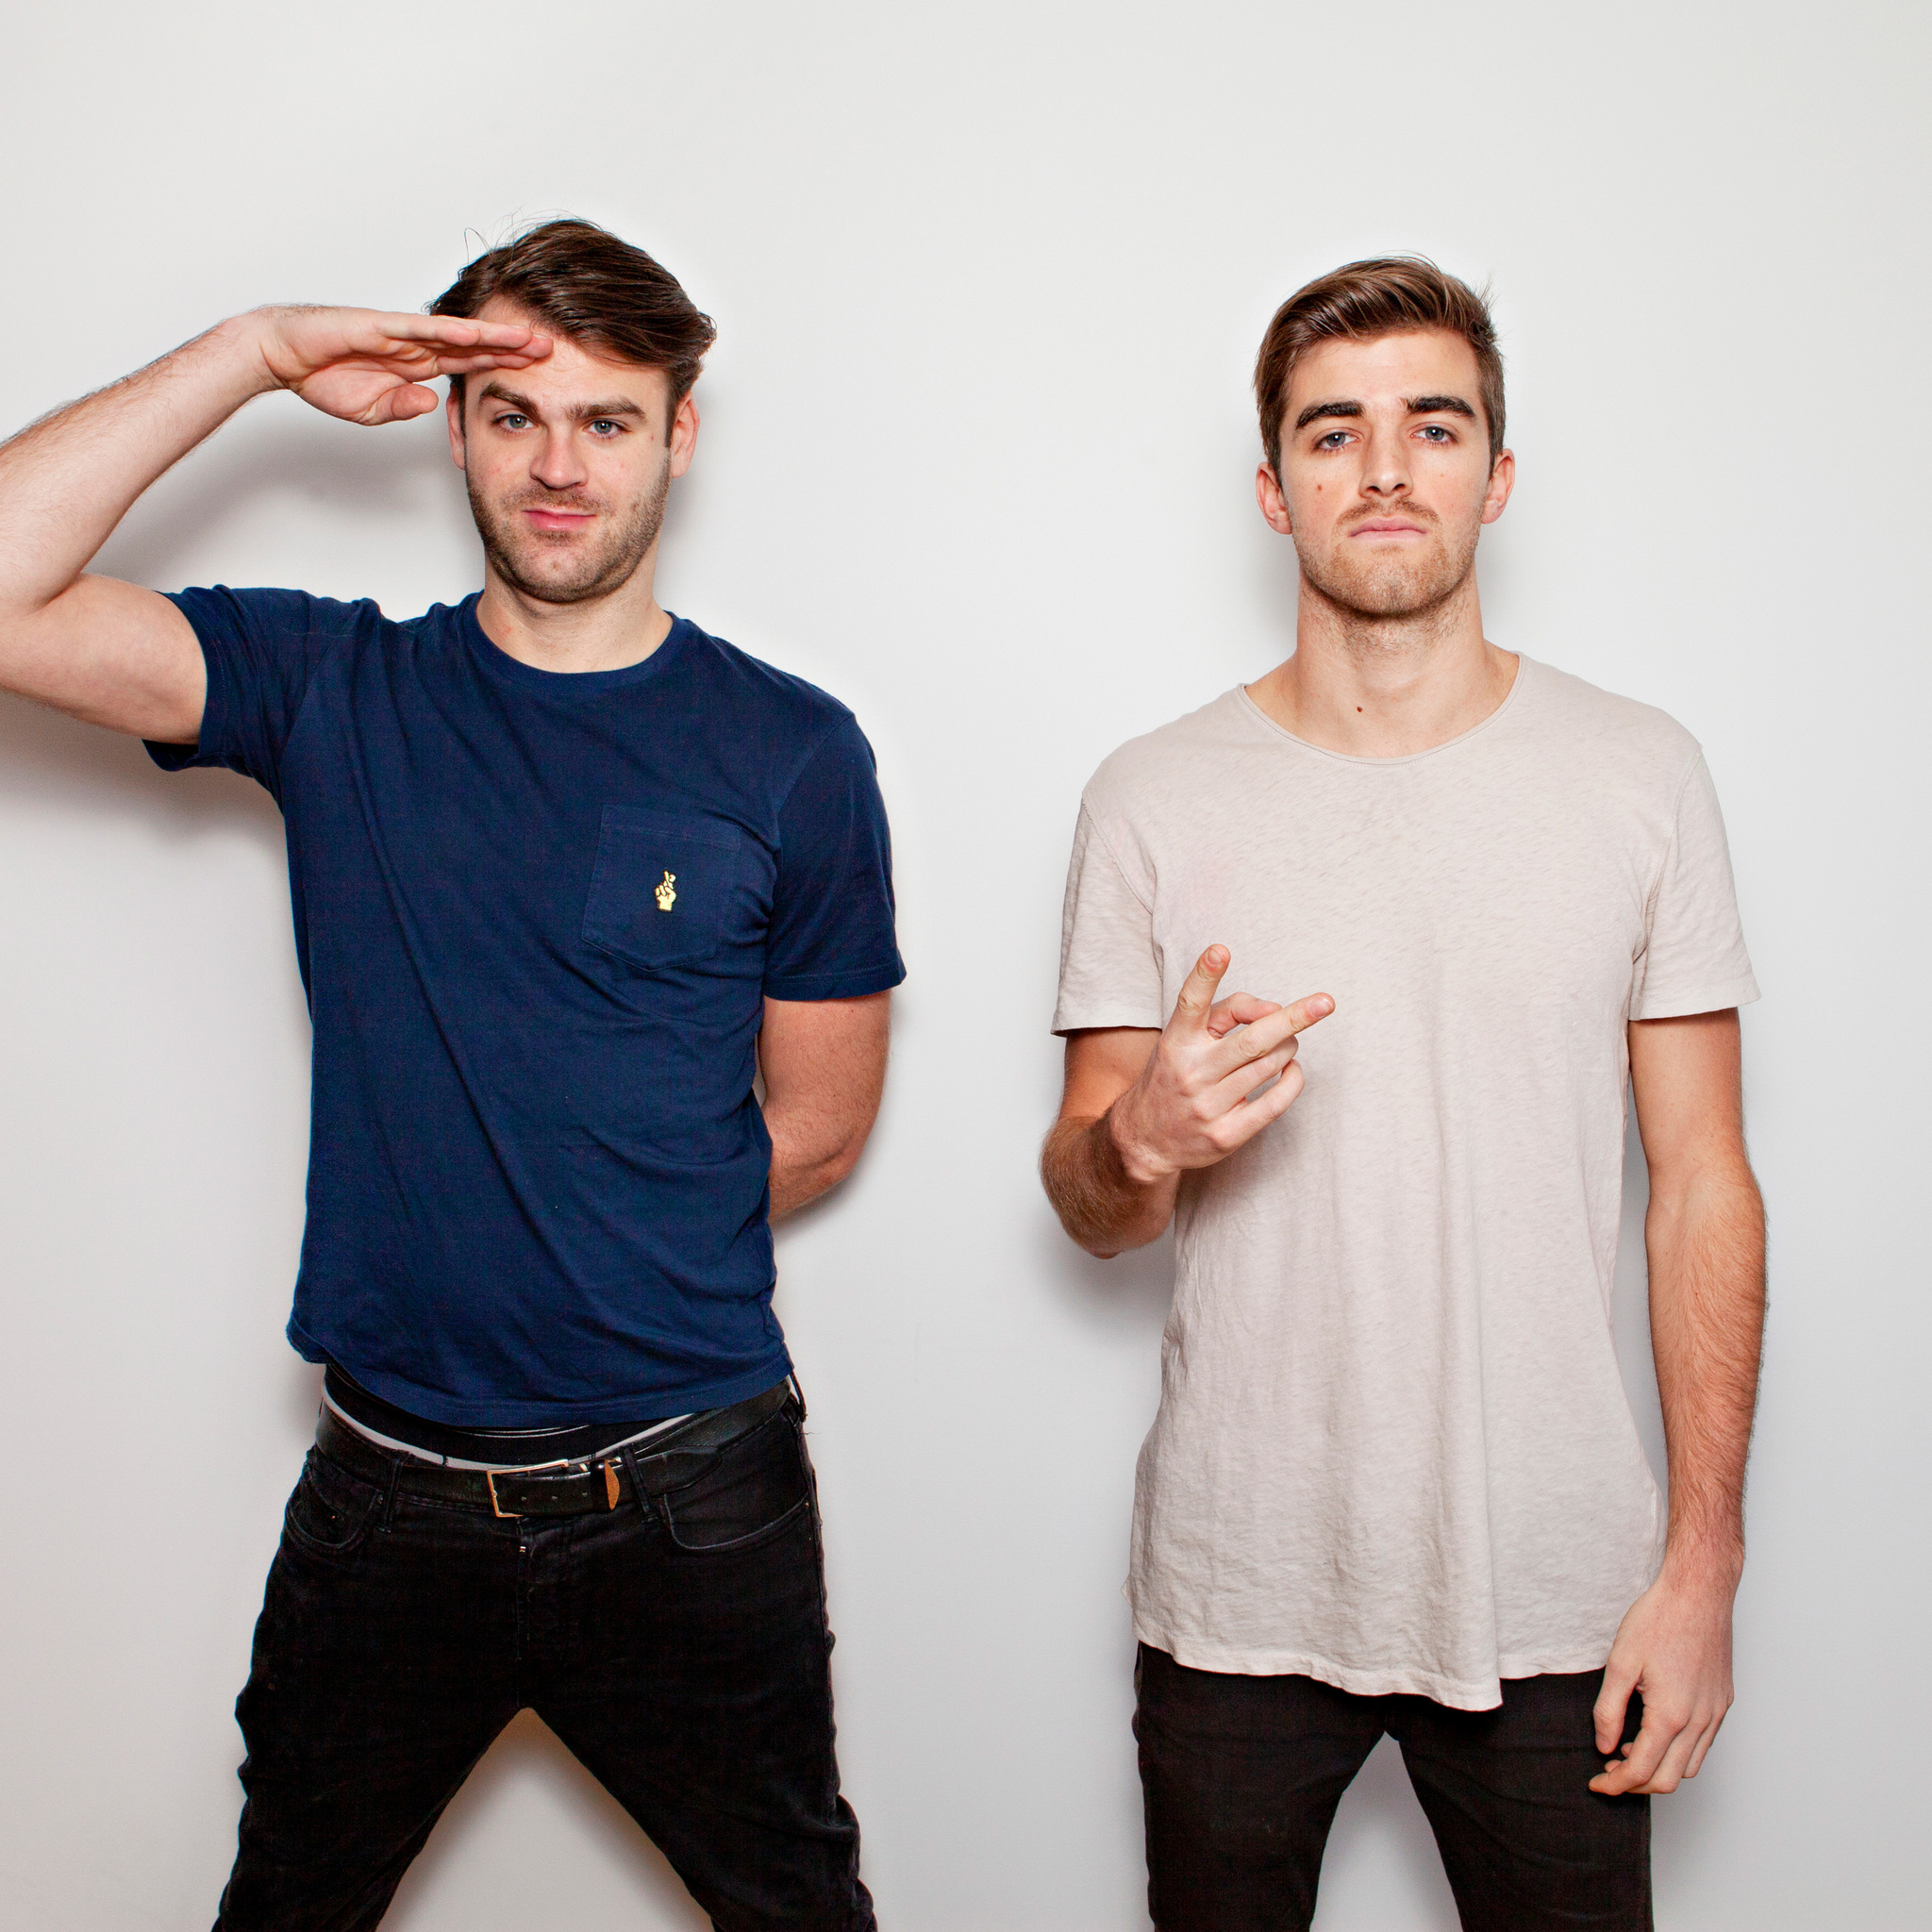 Pall Chainsmokers 5k Latest In 2048x2048 Resolution. andrew-taggart-and-ale...